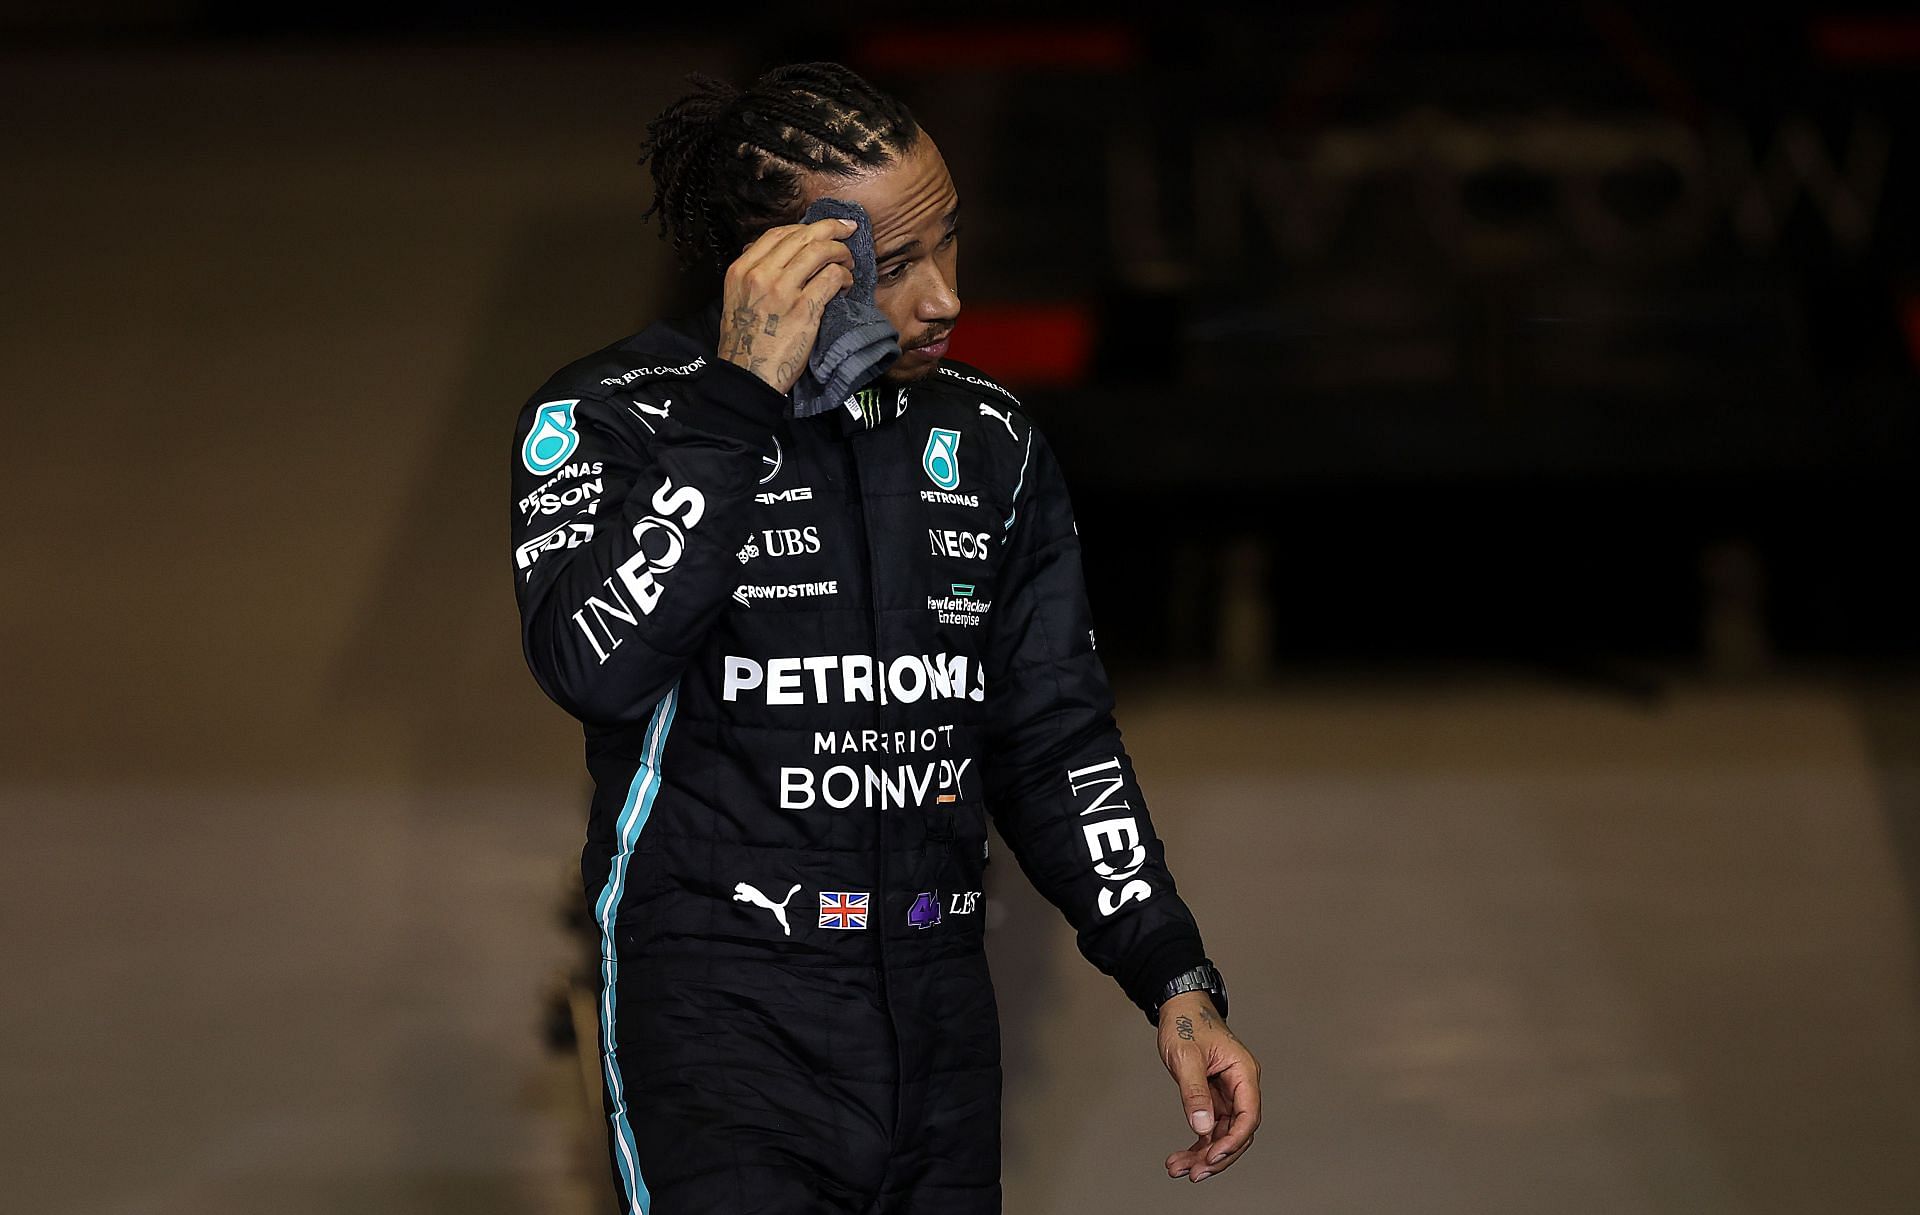 Lewis Hamilton lost out to Max Verstappen on the last lap of 2021 Abu Dhabi Grand Prix